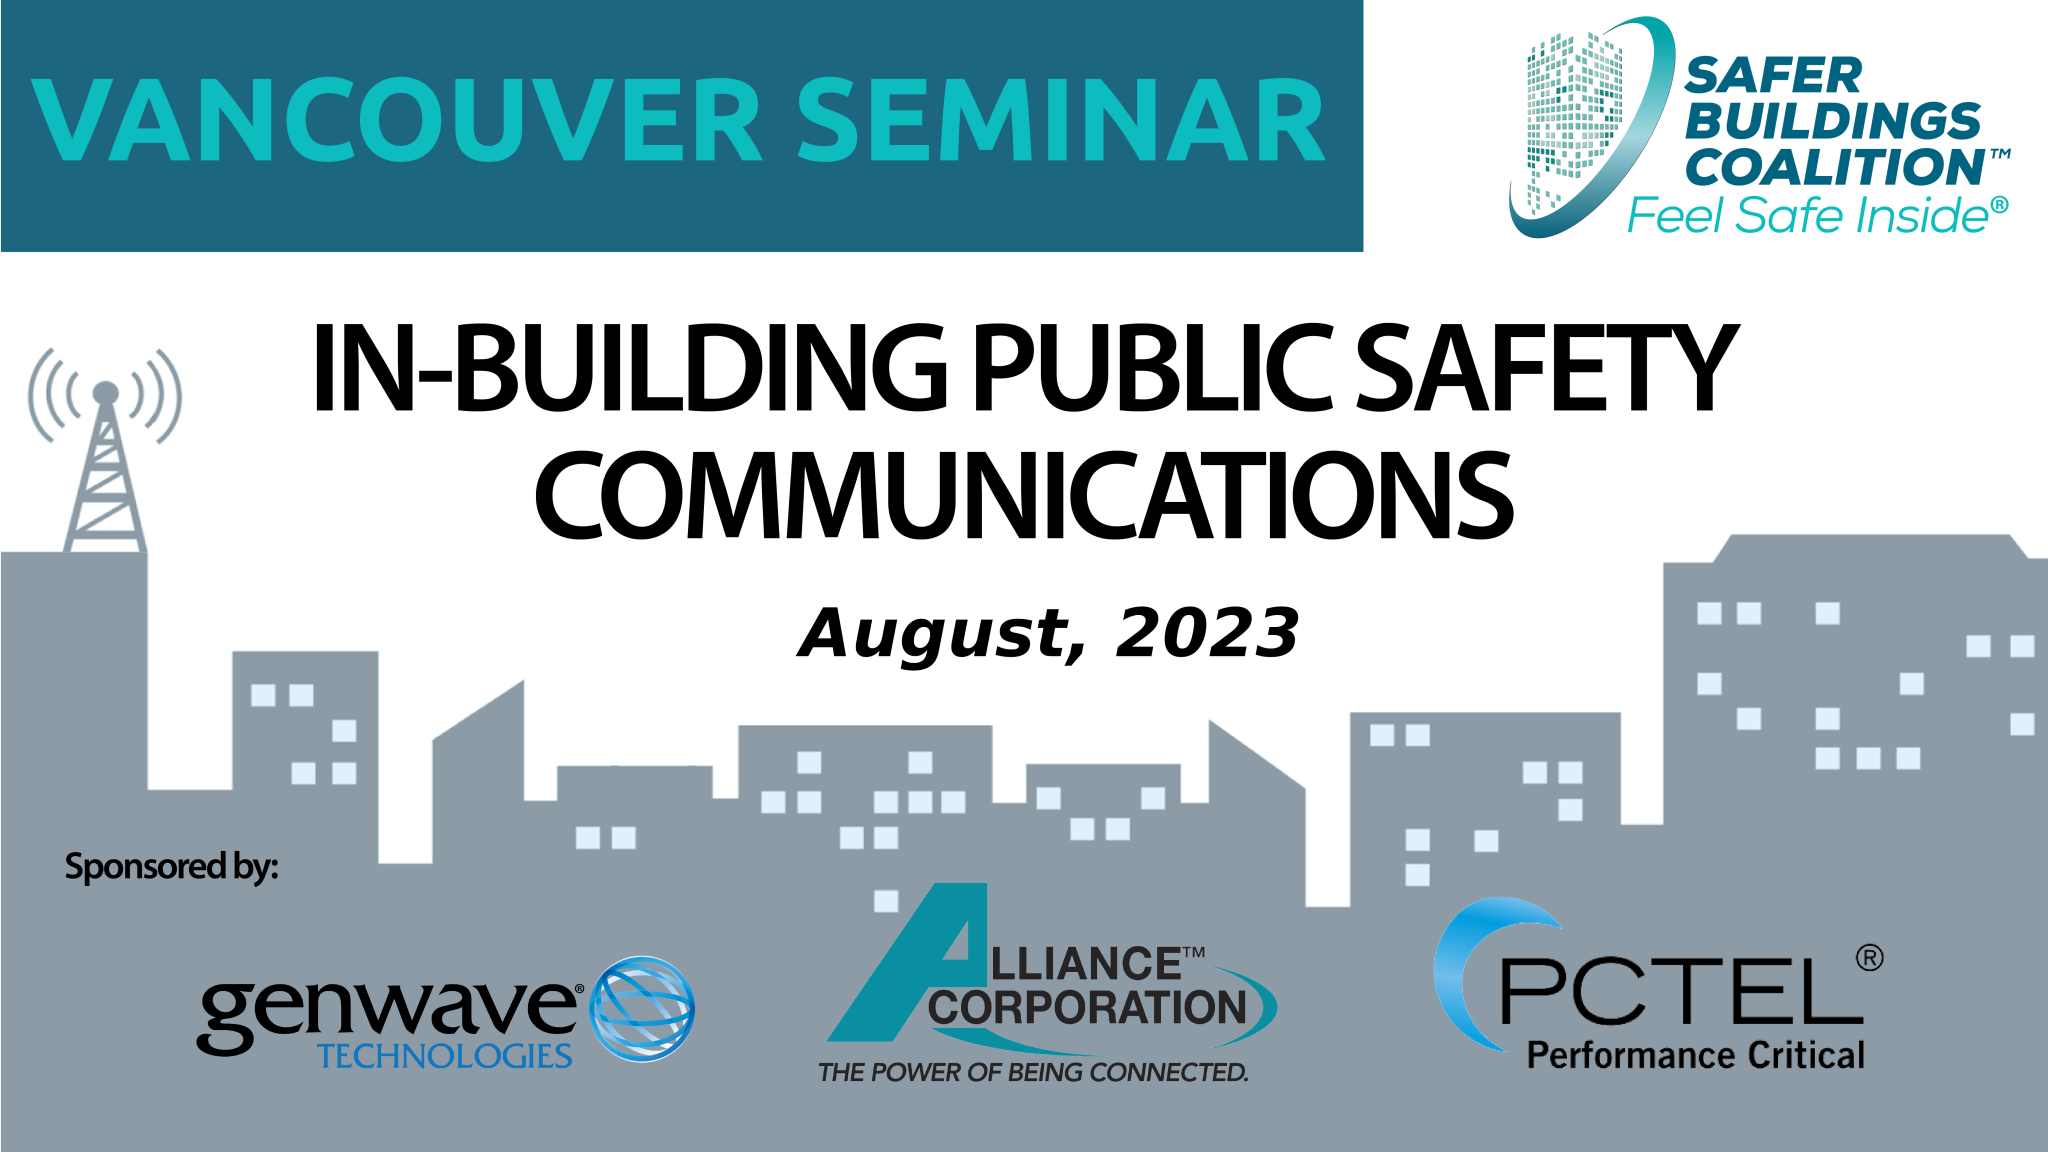 Vancouver Seminar - In Building Public Safety Communications August 2023